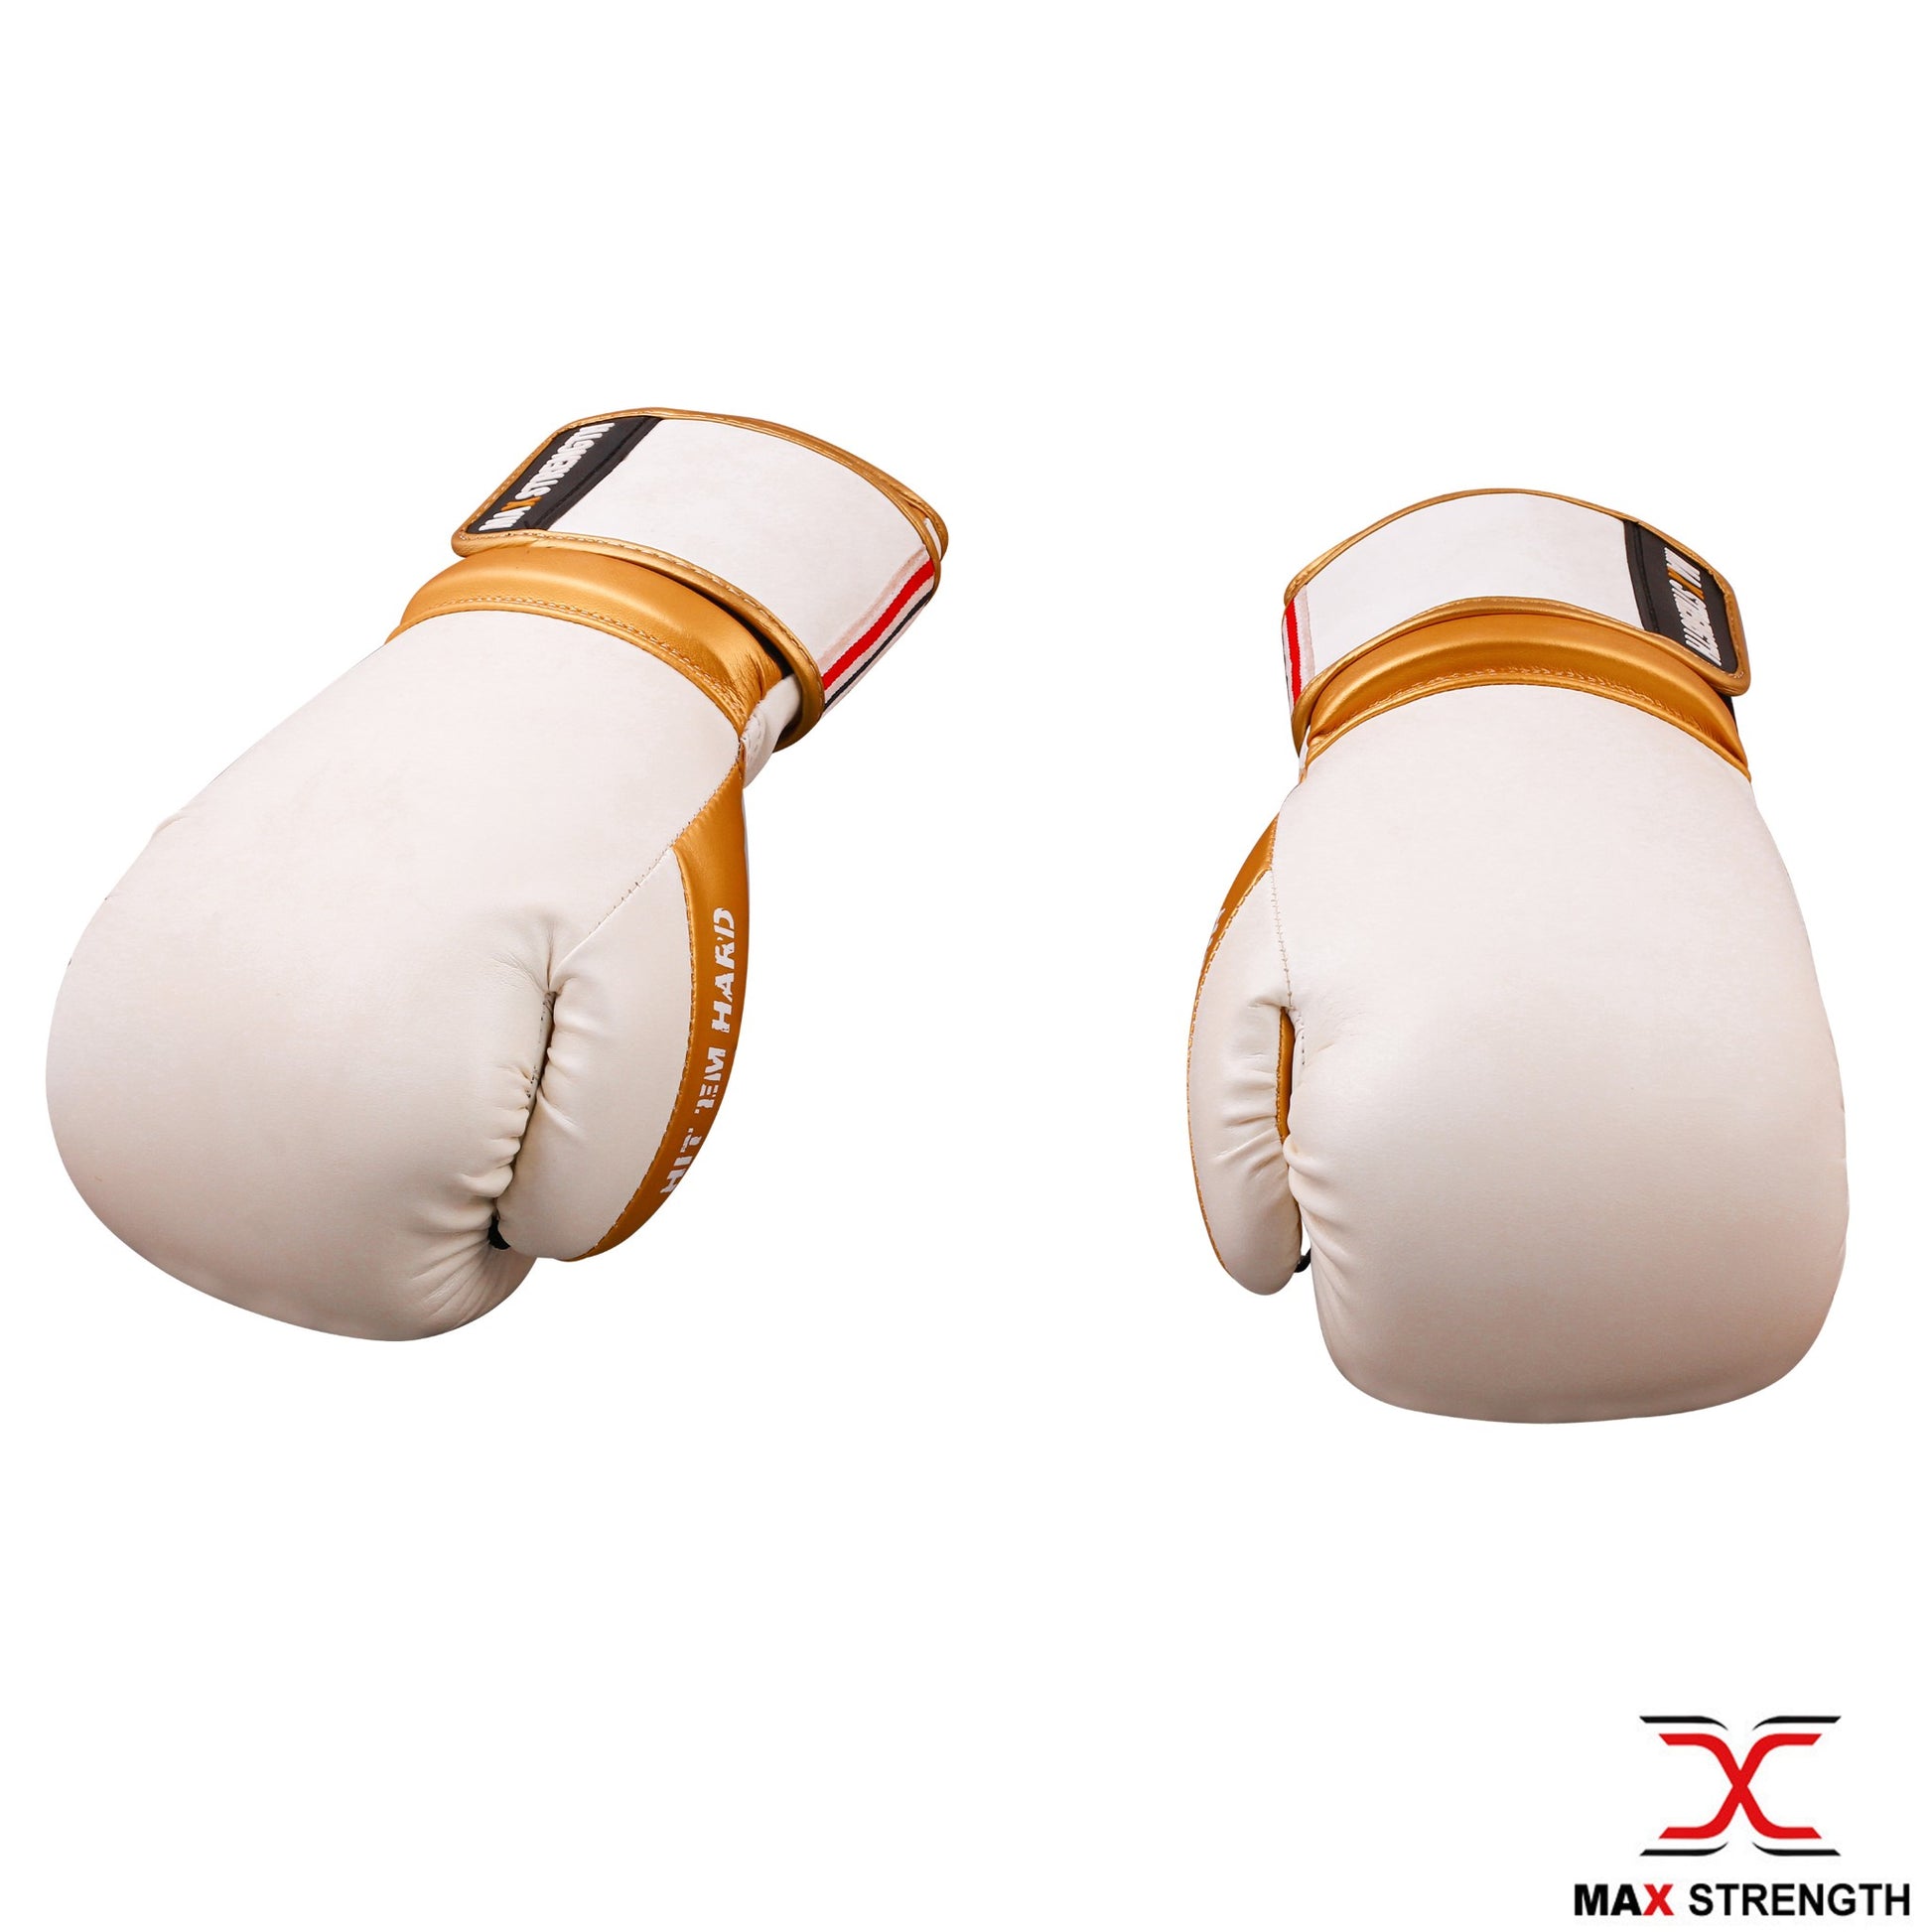 synthetic boxing gloves